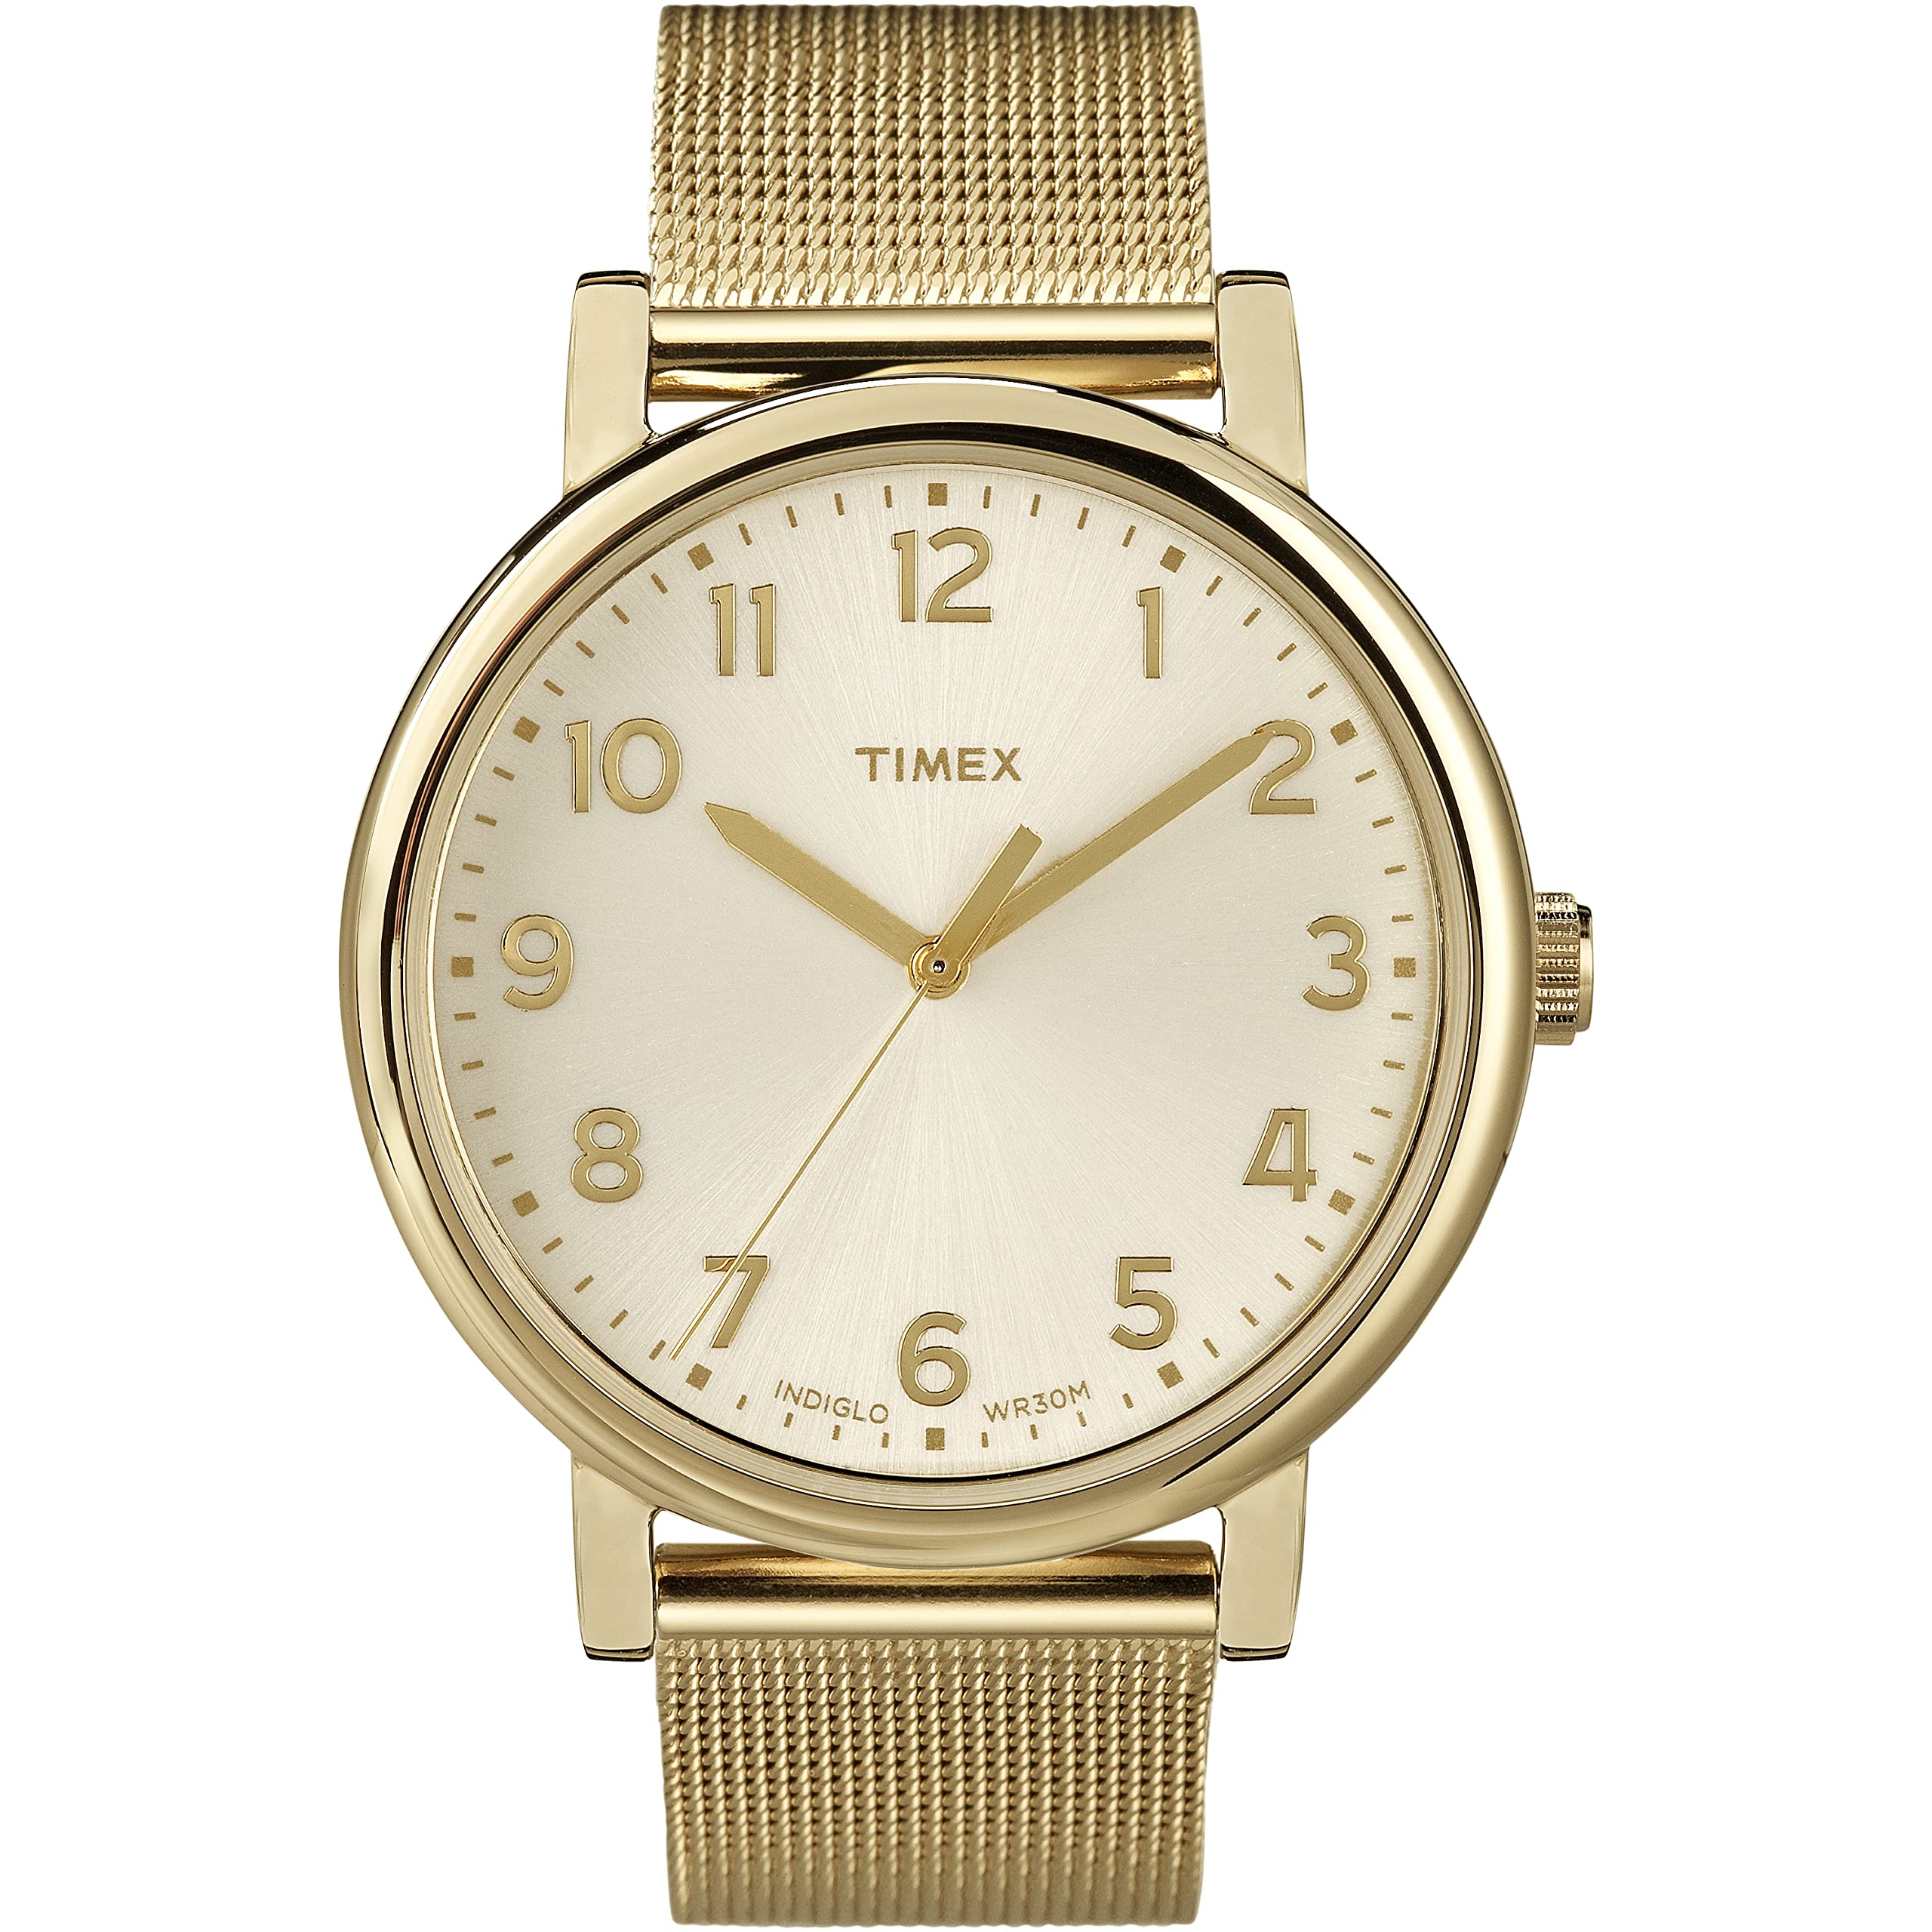 Timex Women's Originals 38mm Watch – Champagne Dial with Gold-Tone Case & Stainless Steel Mesh Bracelet